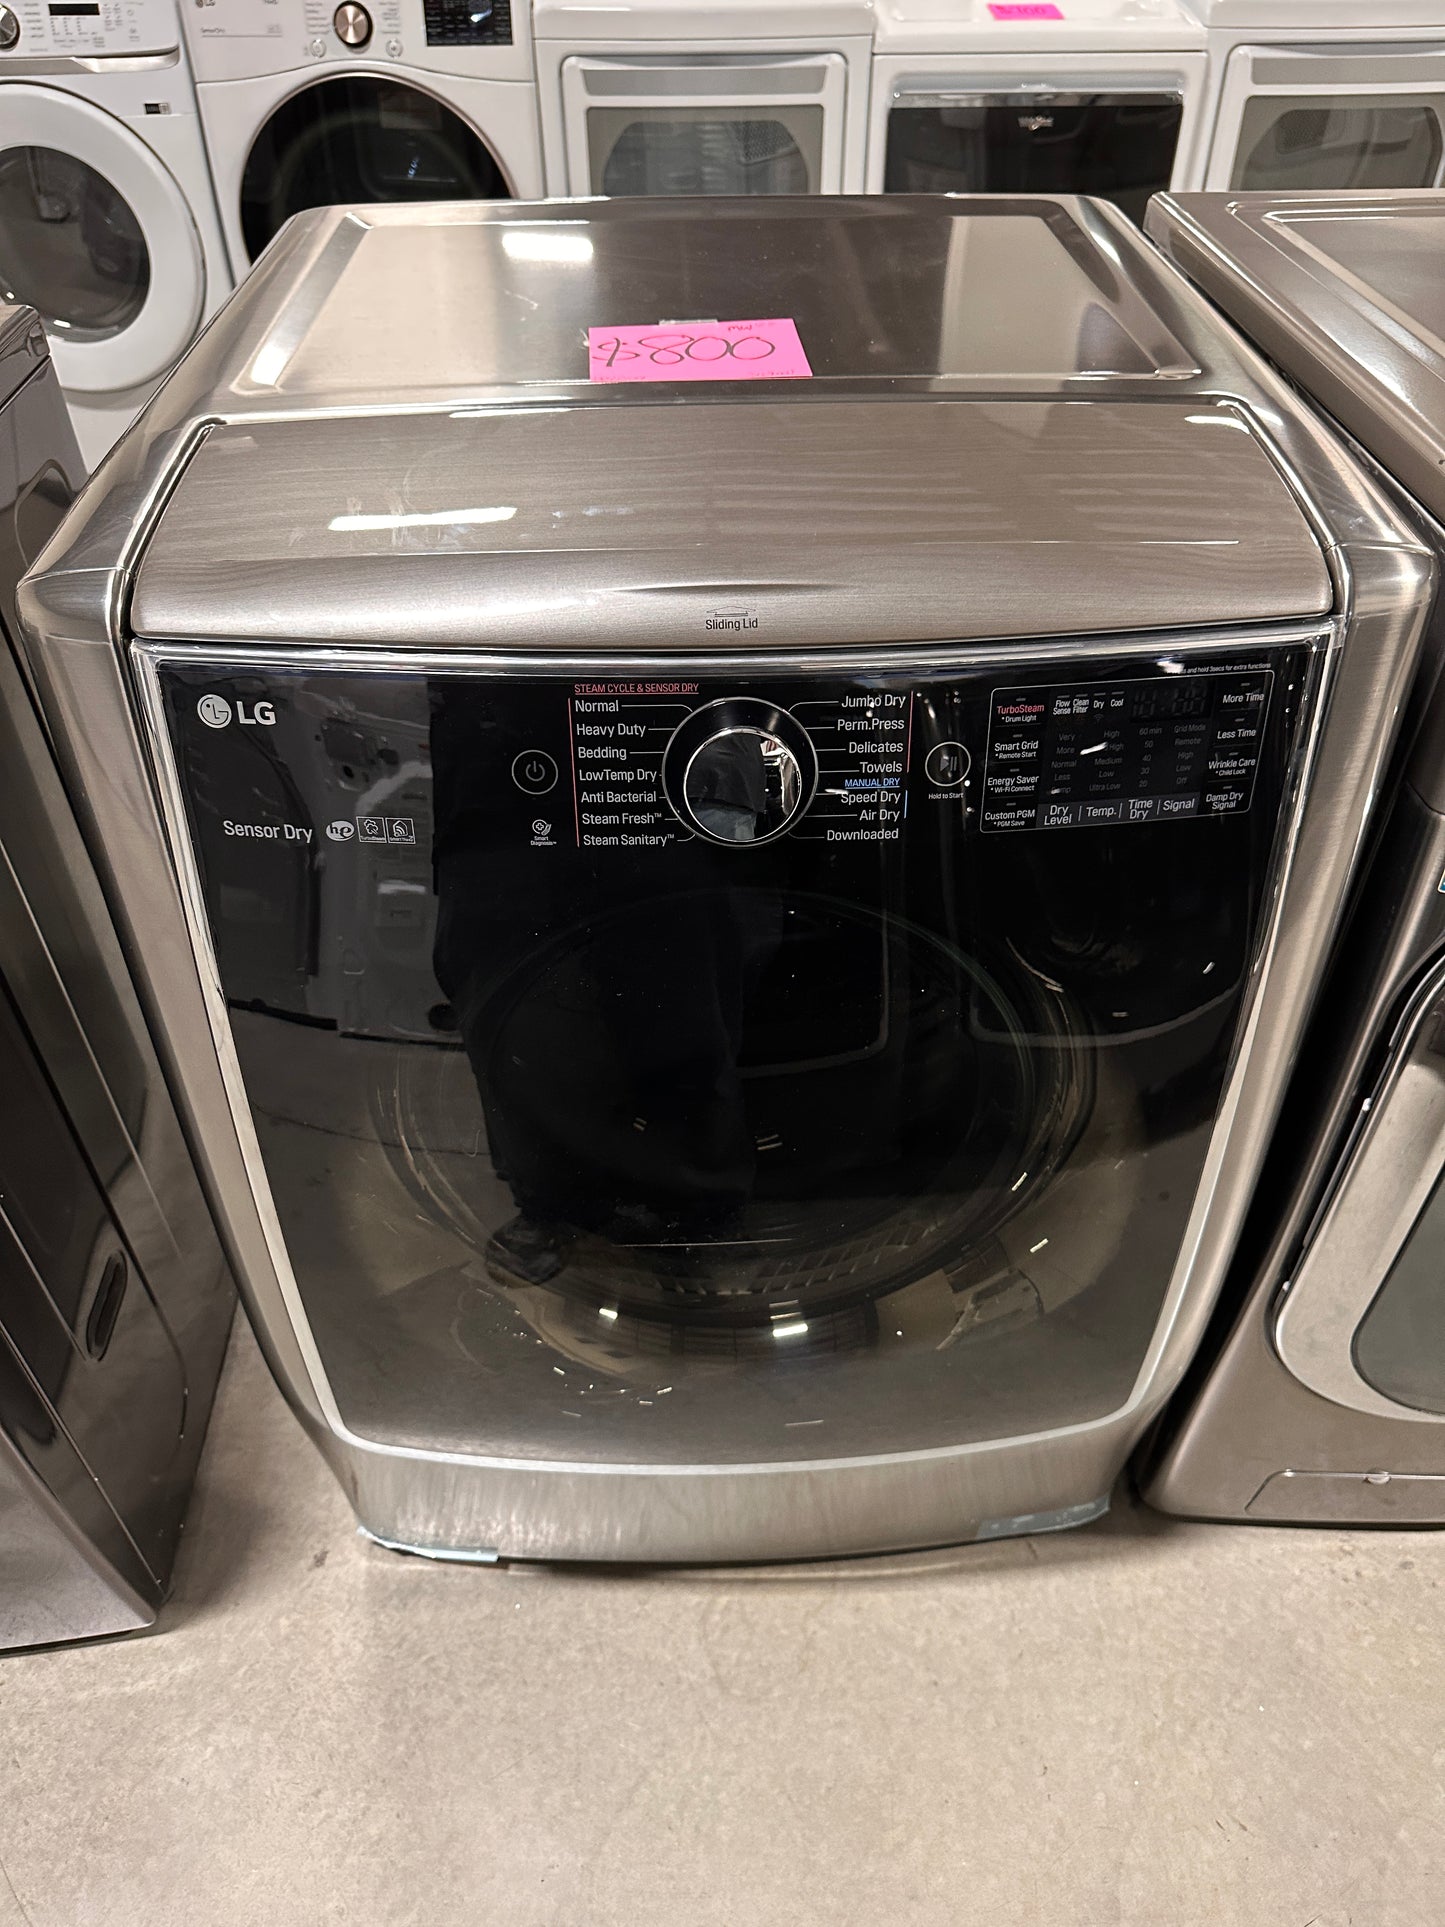 GORGEOUS NEW ELECTRIC DRYER - NEW IN BOX! - DRY12105